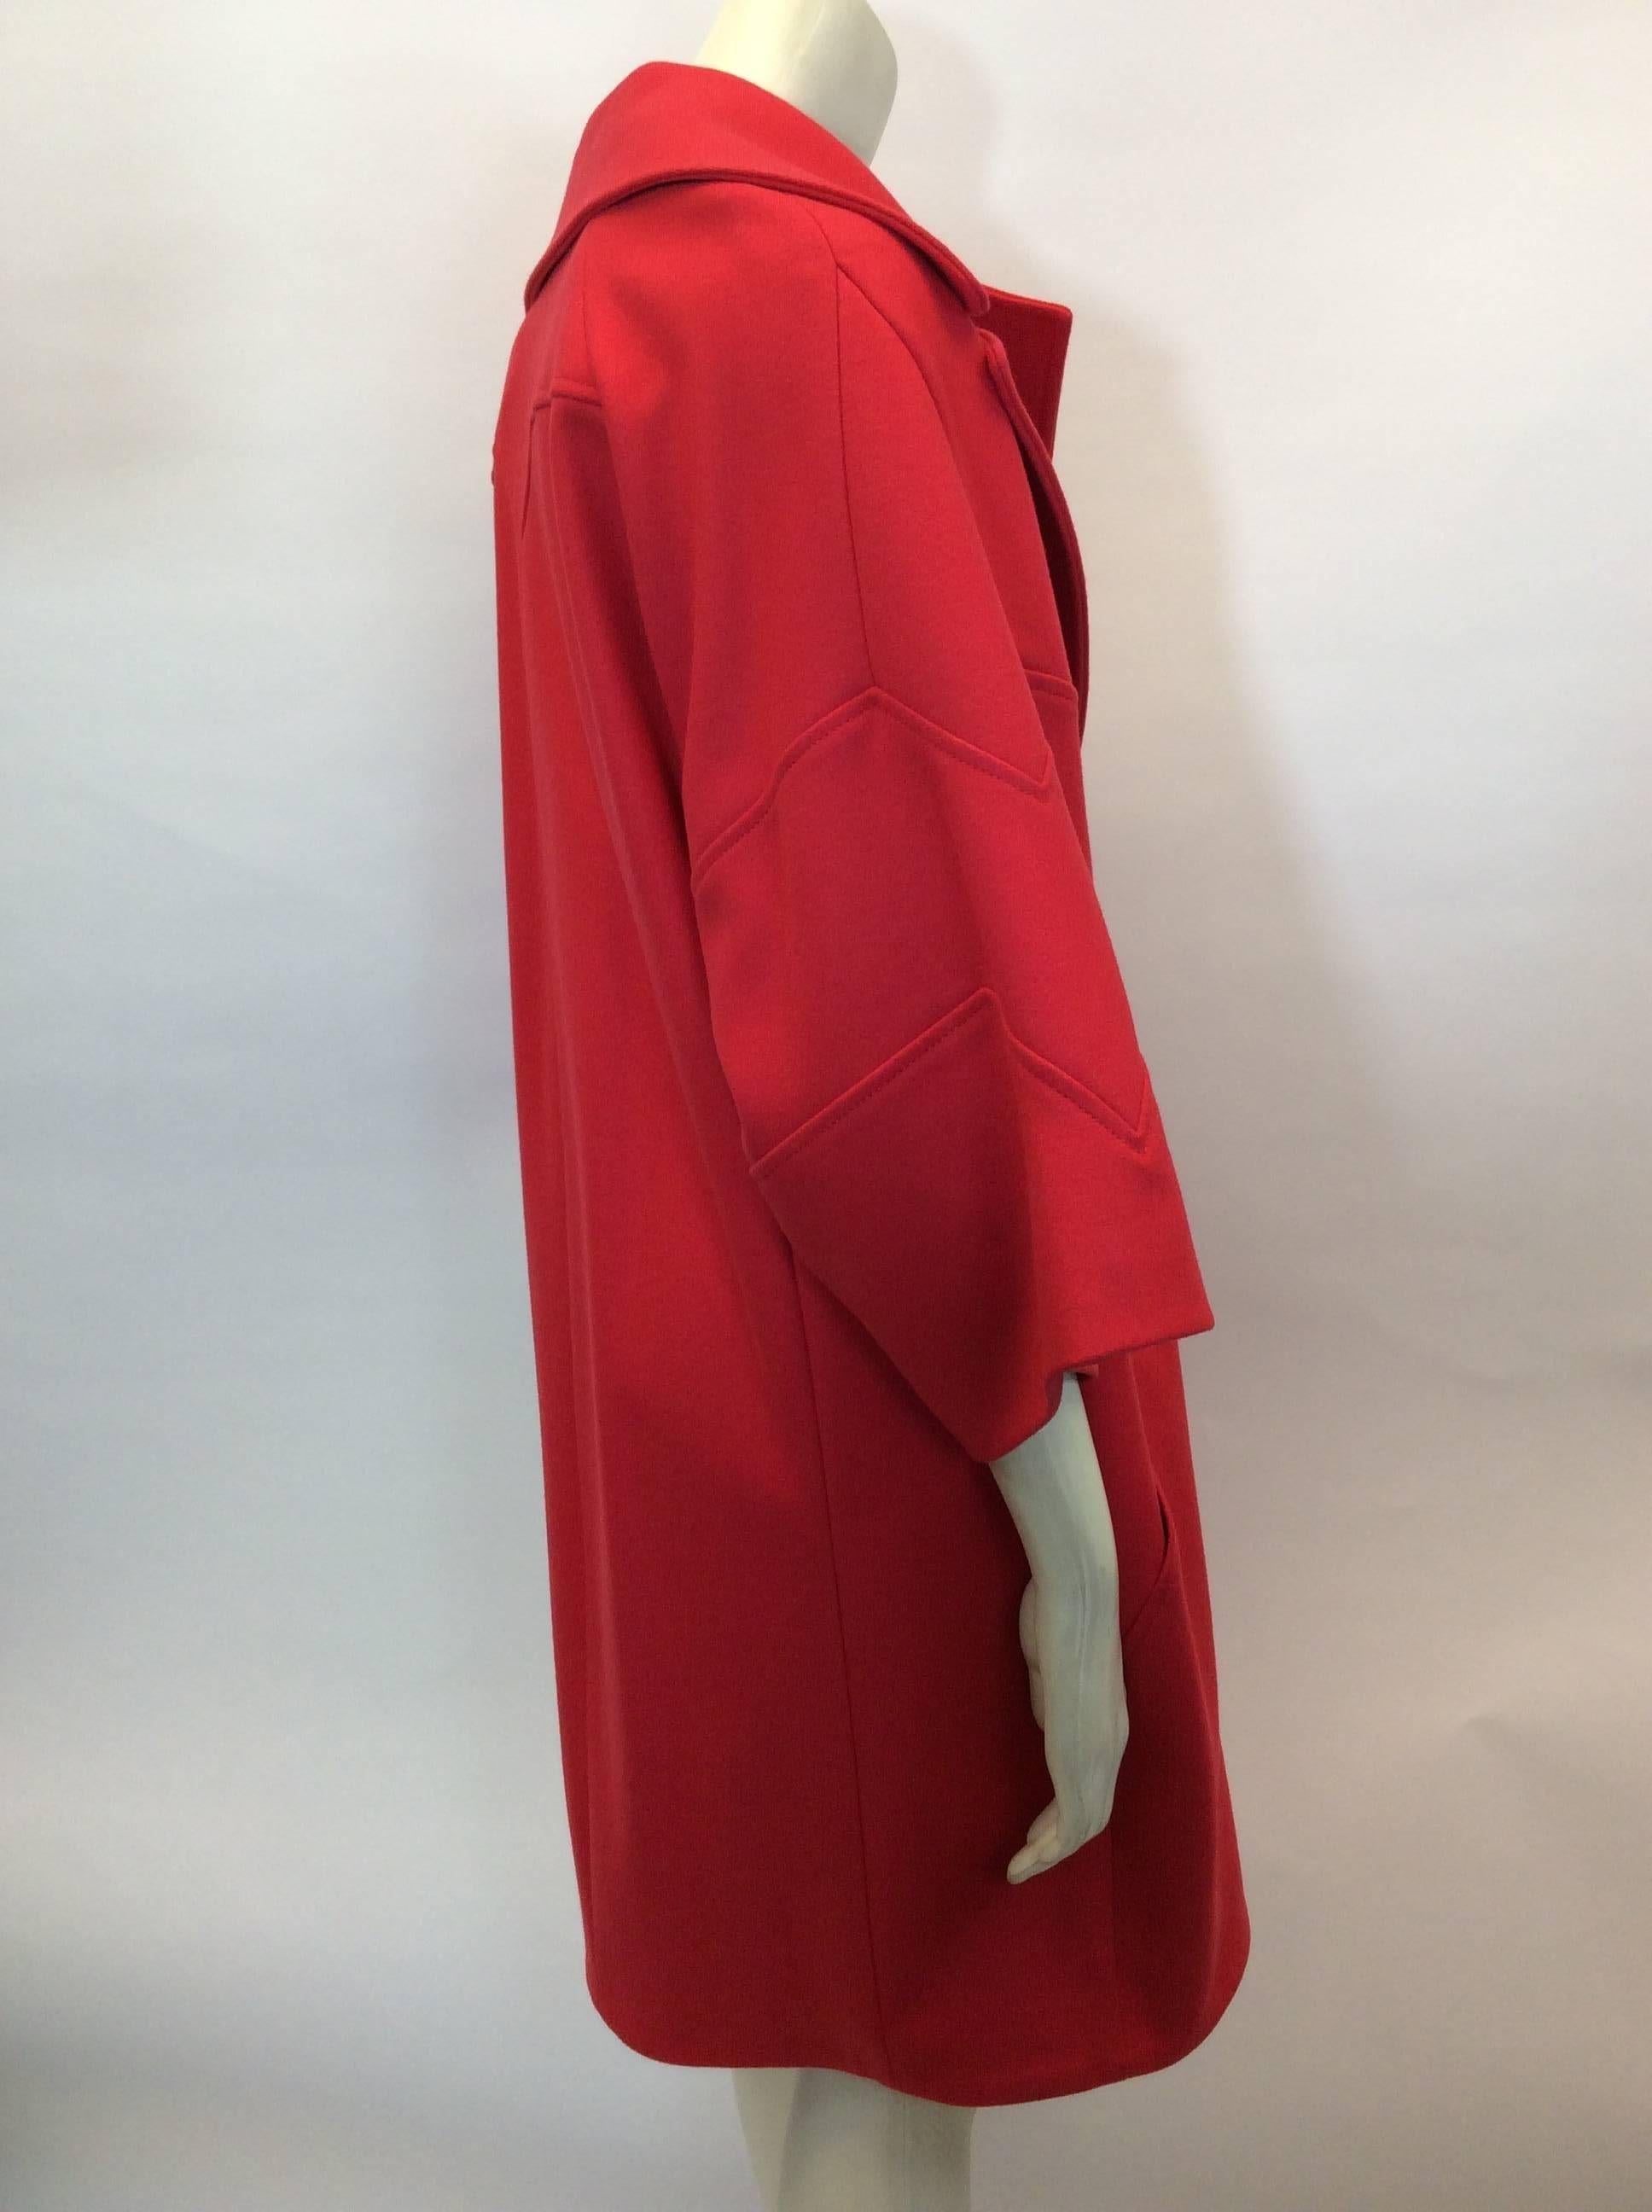 Versace Collection Red Large Collared Coat
Gold interior hidden snap button closures
$599
Size 48
Made in Romania
Large oversized collar
Wool & Viscose
Fully lined
